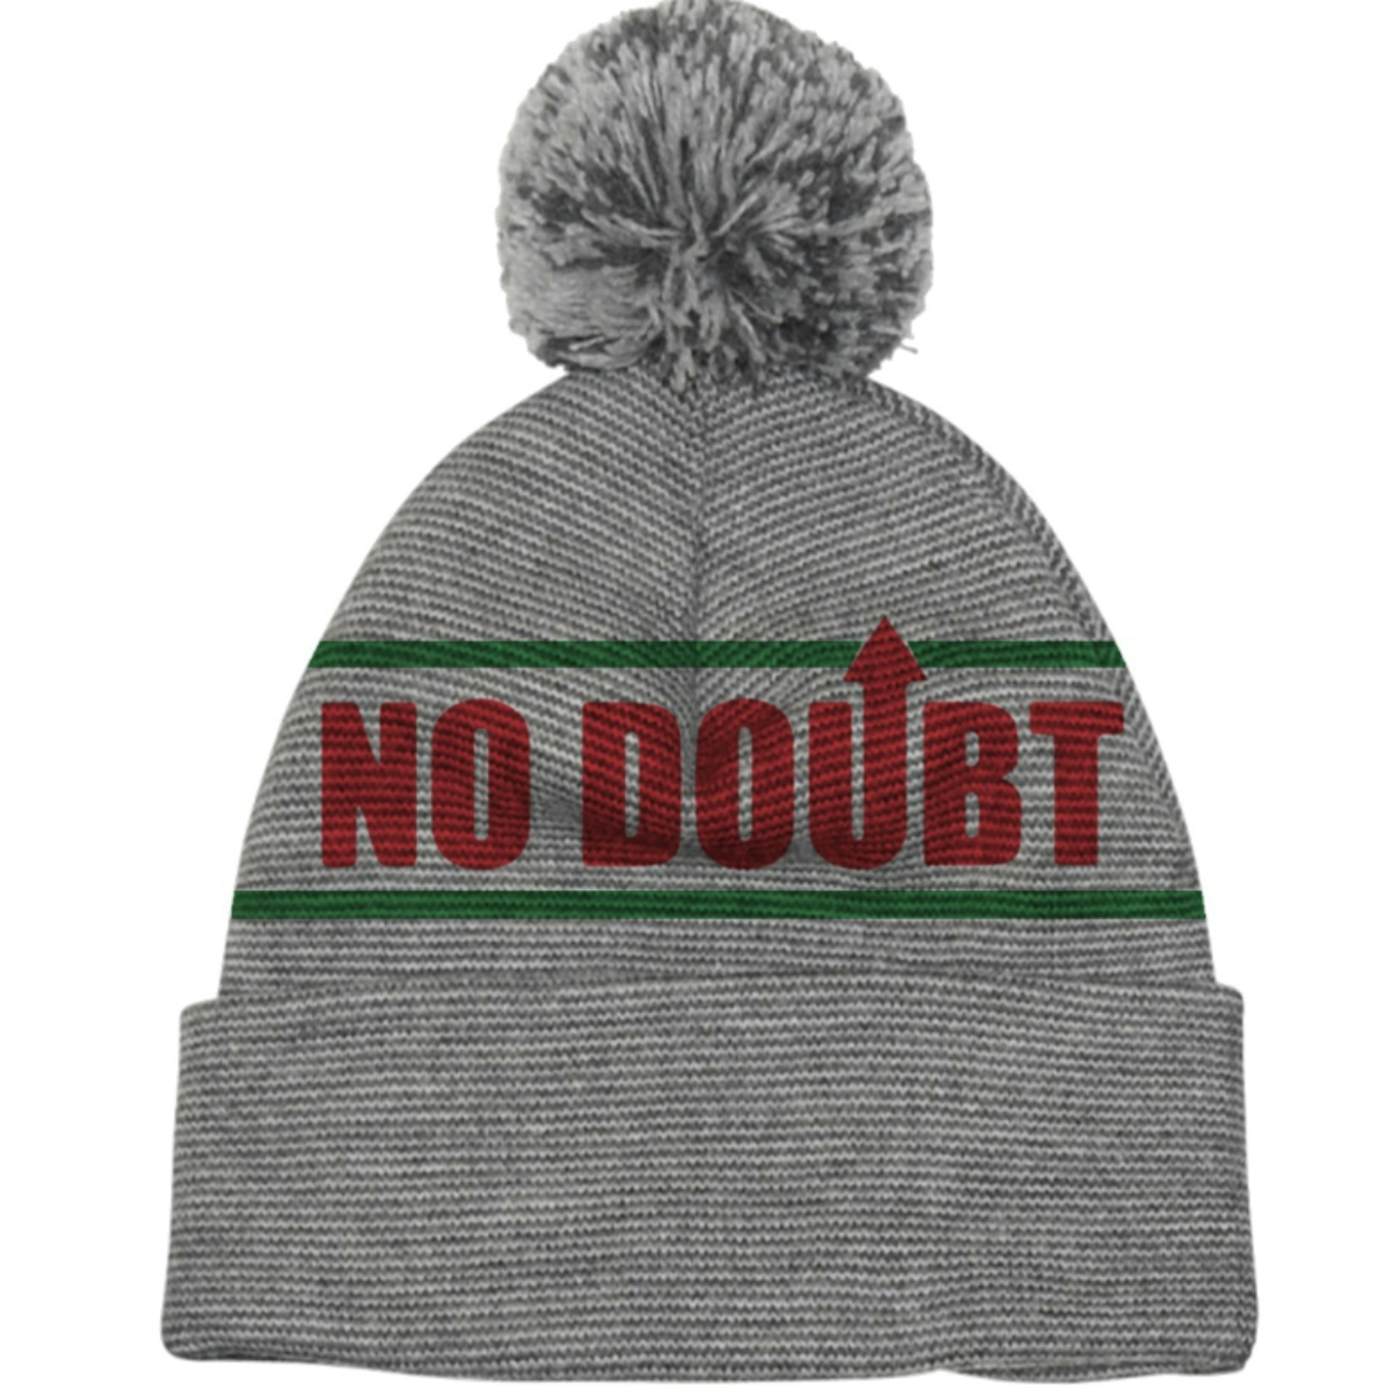 No Doubt Holiday Beanie